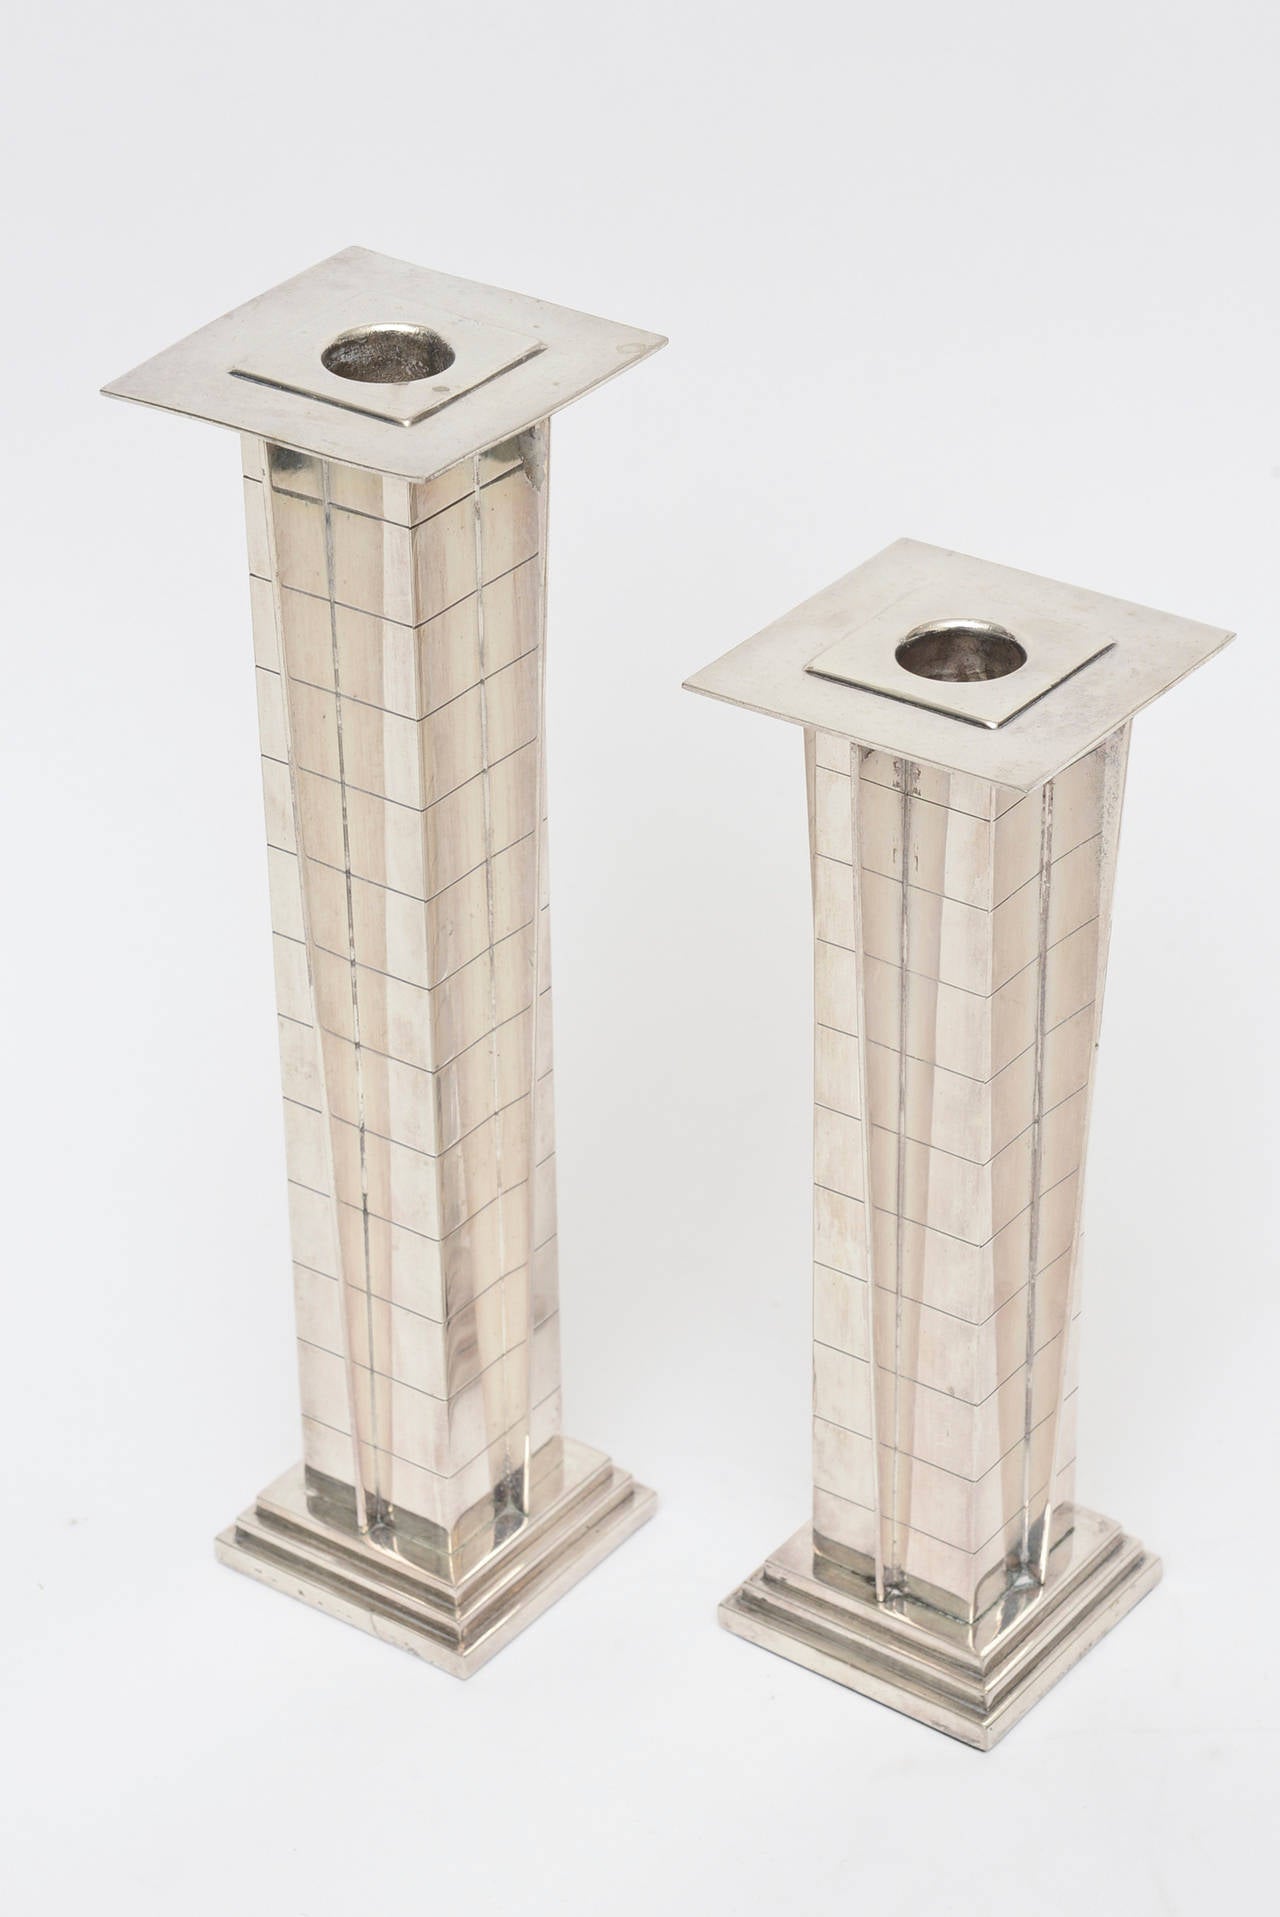 The two different sizes of these amazing and stunning vintage silver plate Art Deco style candlesticks have the squared design that make up the skyscraper look. These are from the 1960s. Elegant and hard to find! The smaller size of the candlestick